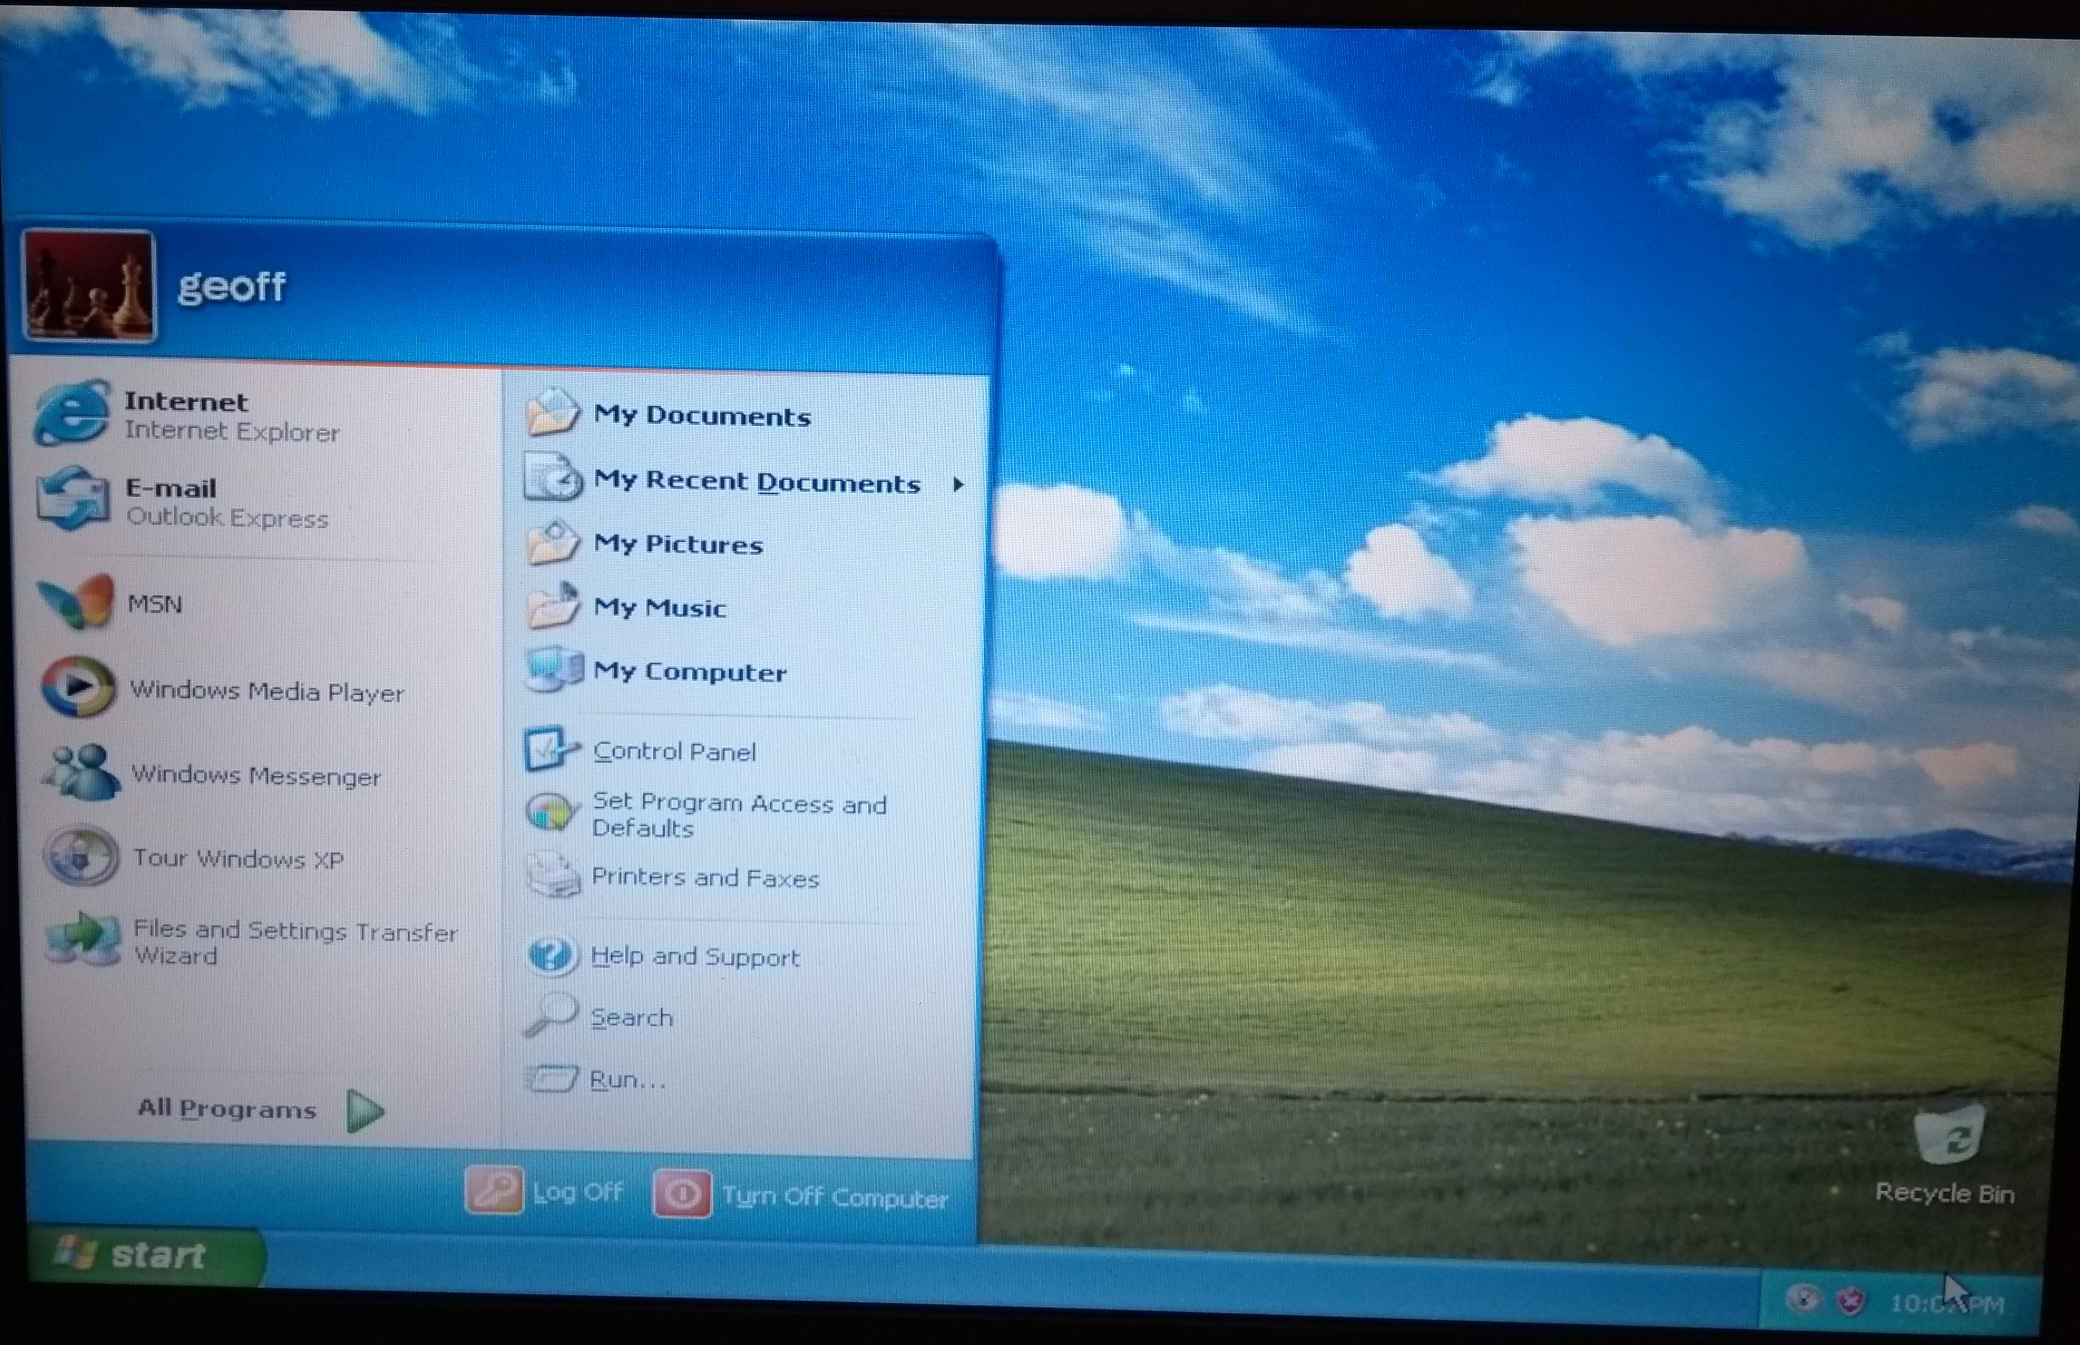 
    A screenshot showing the freshly installed Windows. No programs are running. The start menu is open
    titled with the username ‘geoff’ and the chess pieces icon next to it.
    The desktop background 